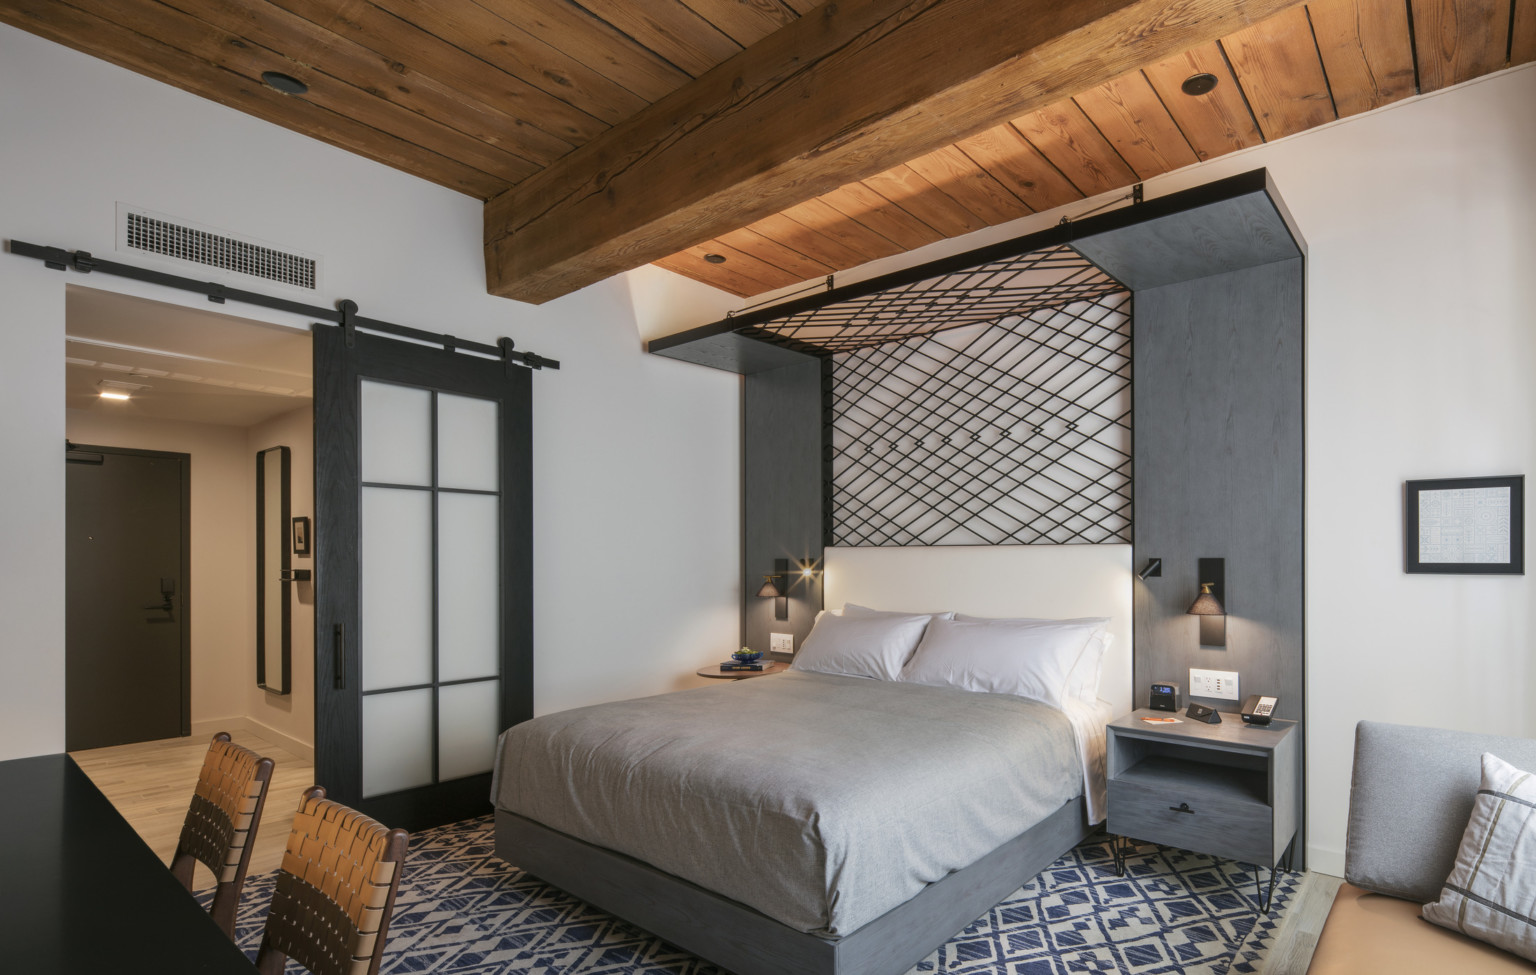 Bedroom with geometric black metal design behind wall and folding over top of bed to form canopy. Left, glass sliding door